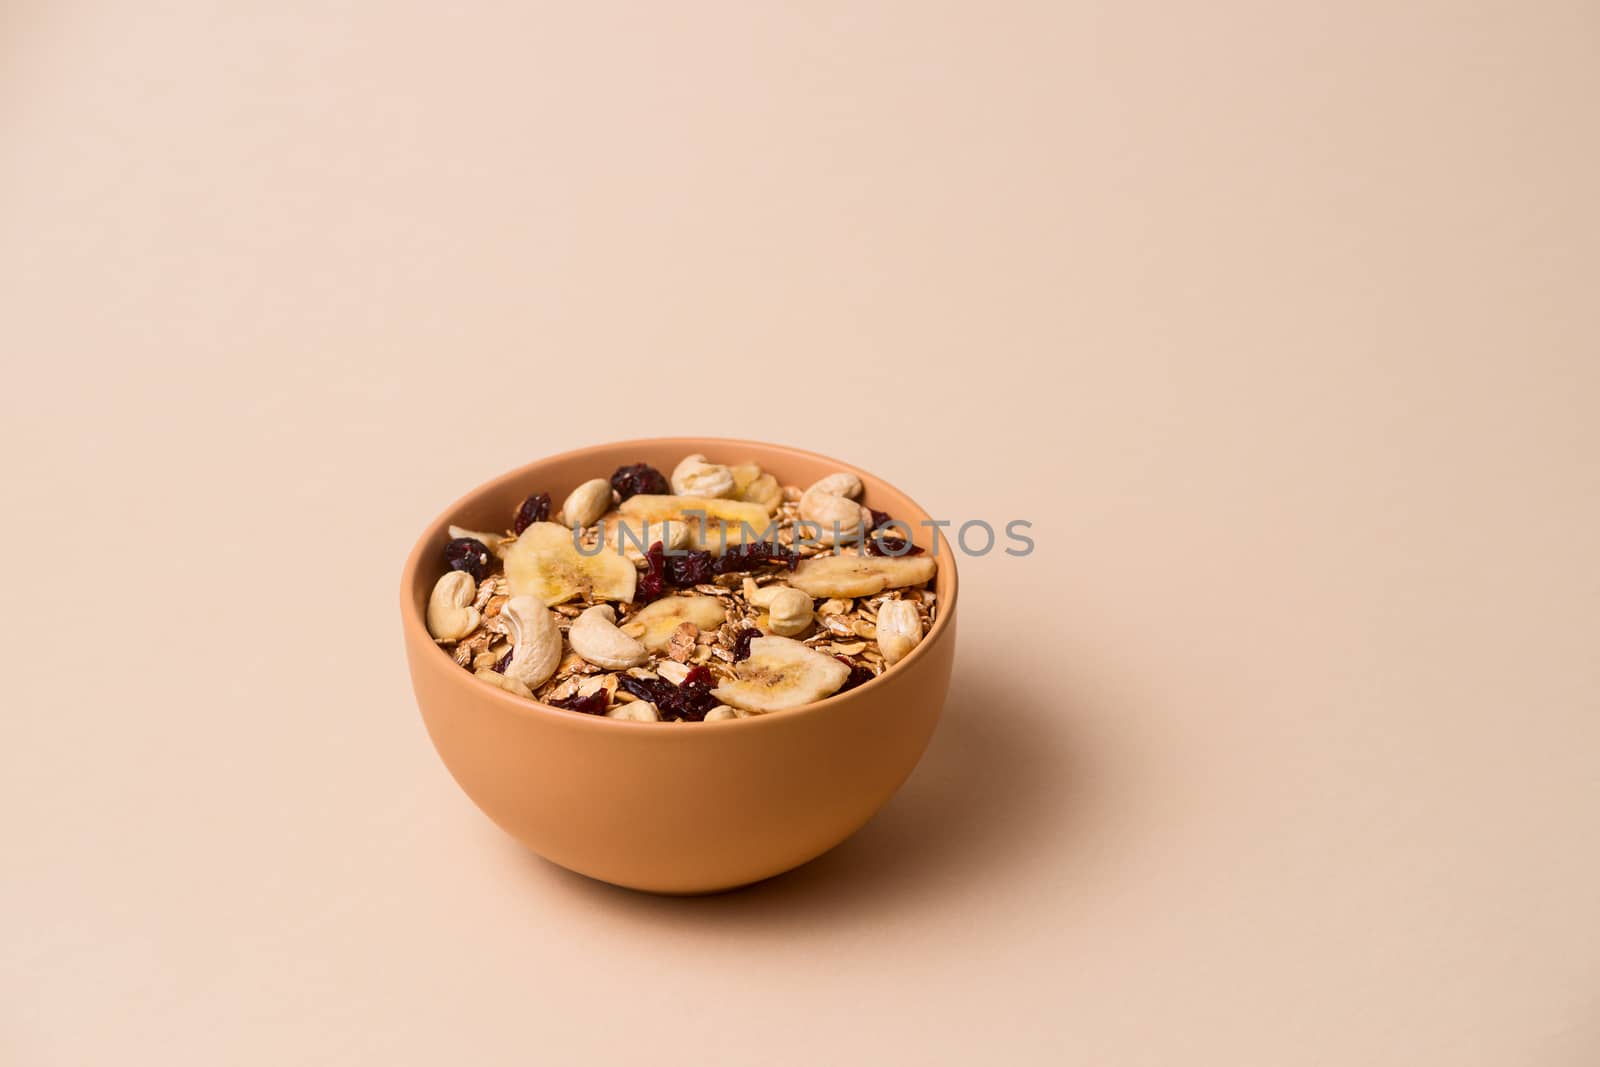 A fresh granola with dried and candied nuts and fruits in beige colour bowl closeup on beige bakground. Concept of nutrient and healty breakfast or meal